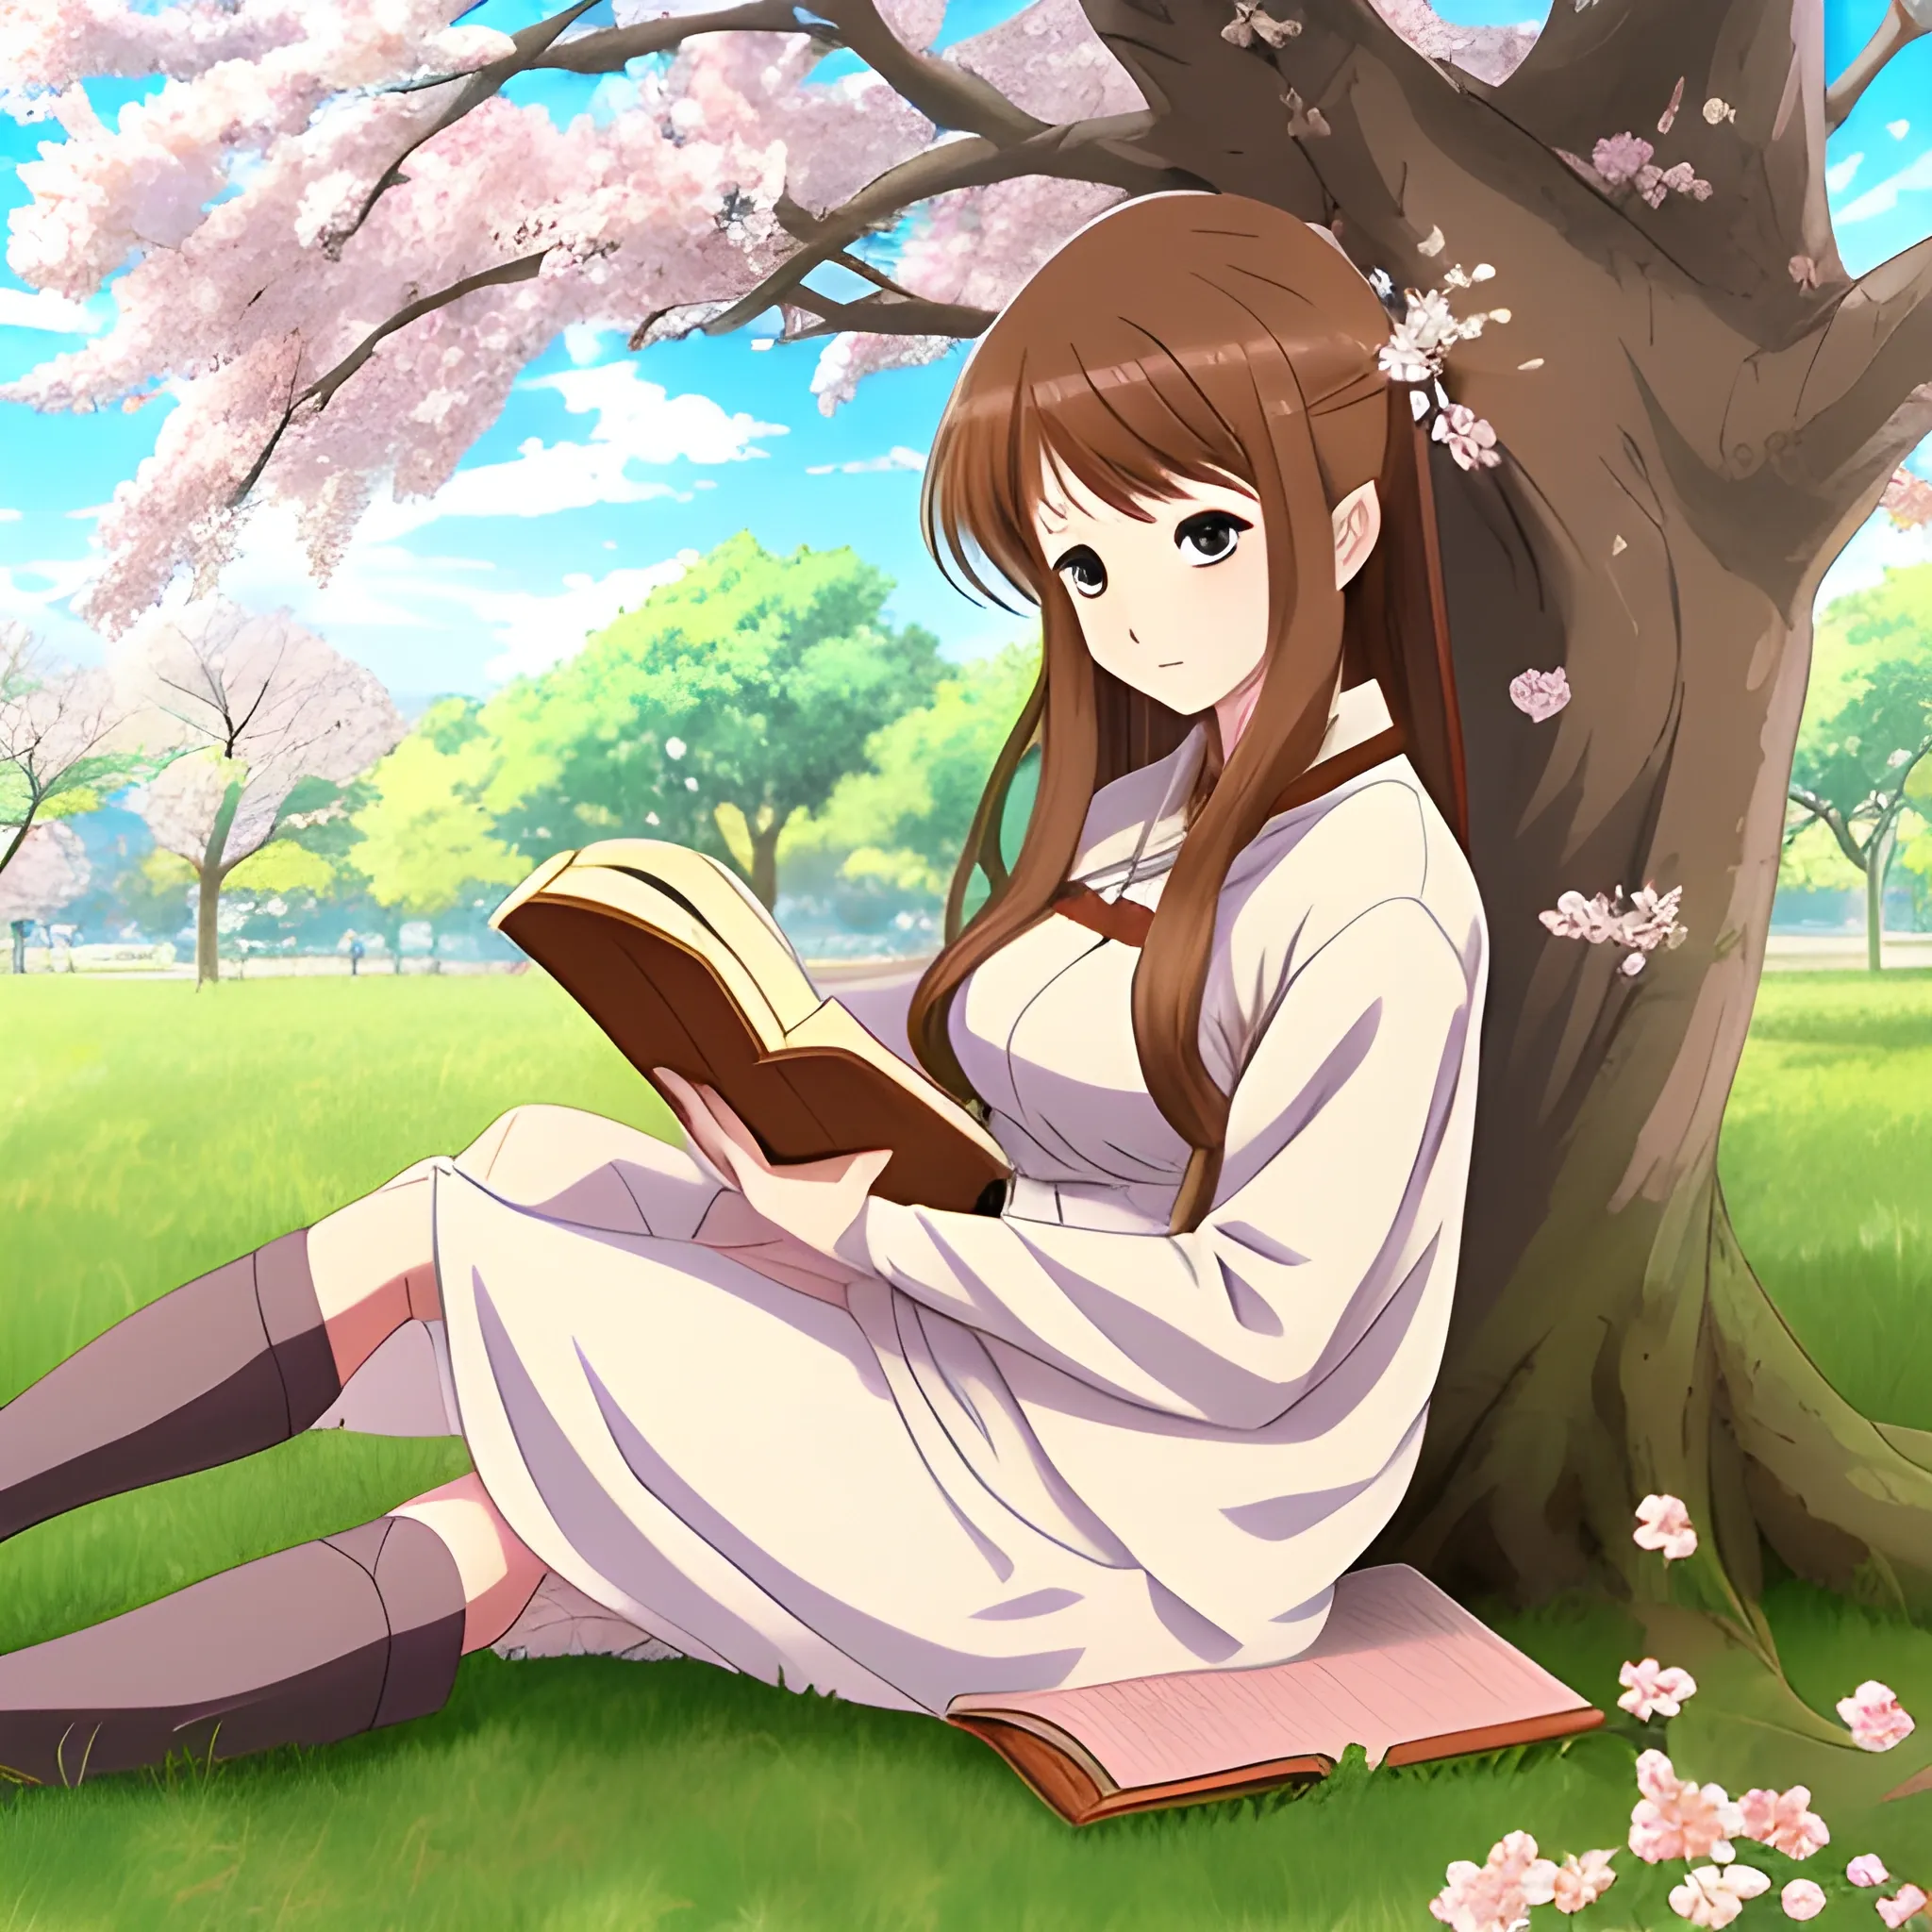 anime-scenery-cherry-blossoms-background-hd-images-1_28214060692_o | Anime  backgrounds wallpapers, Anime scenery, Anime cherry blossom